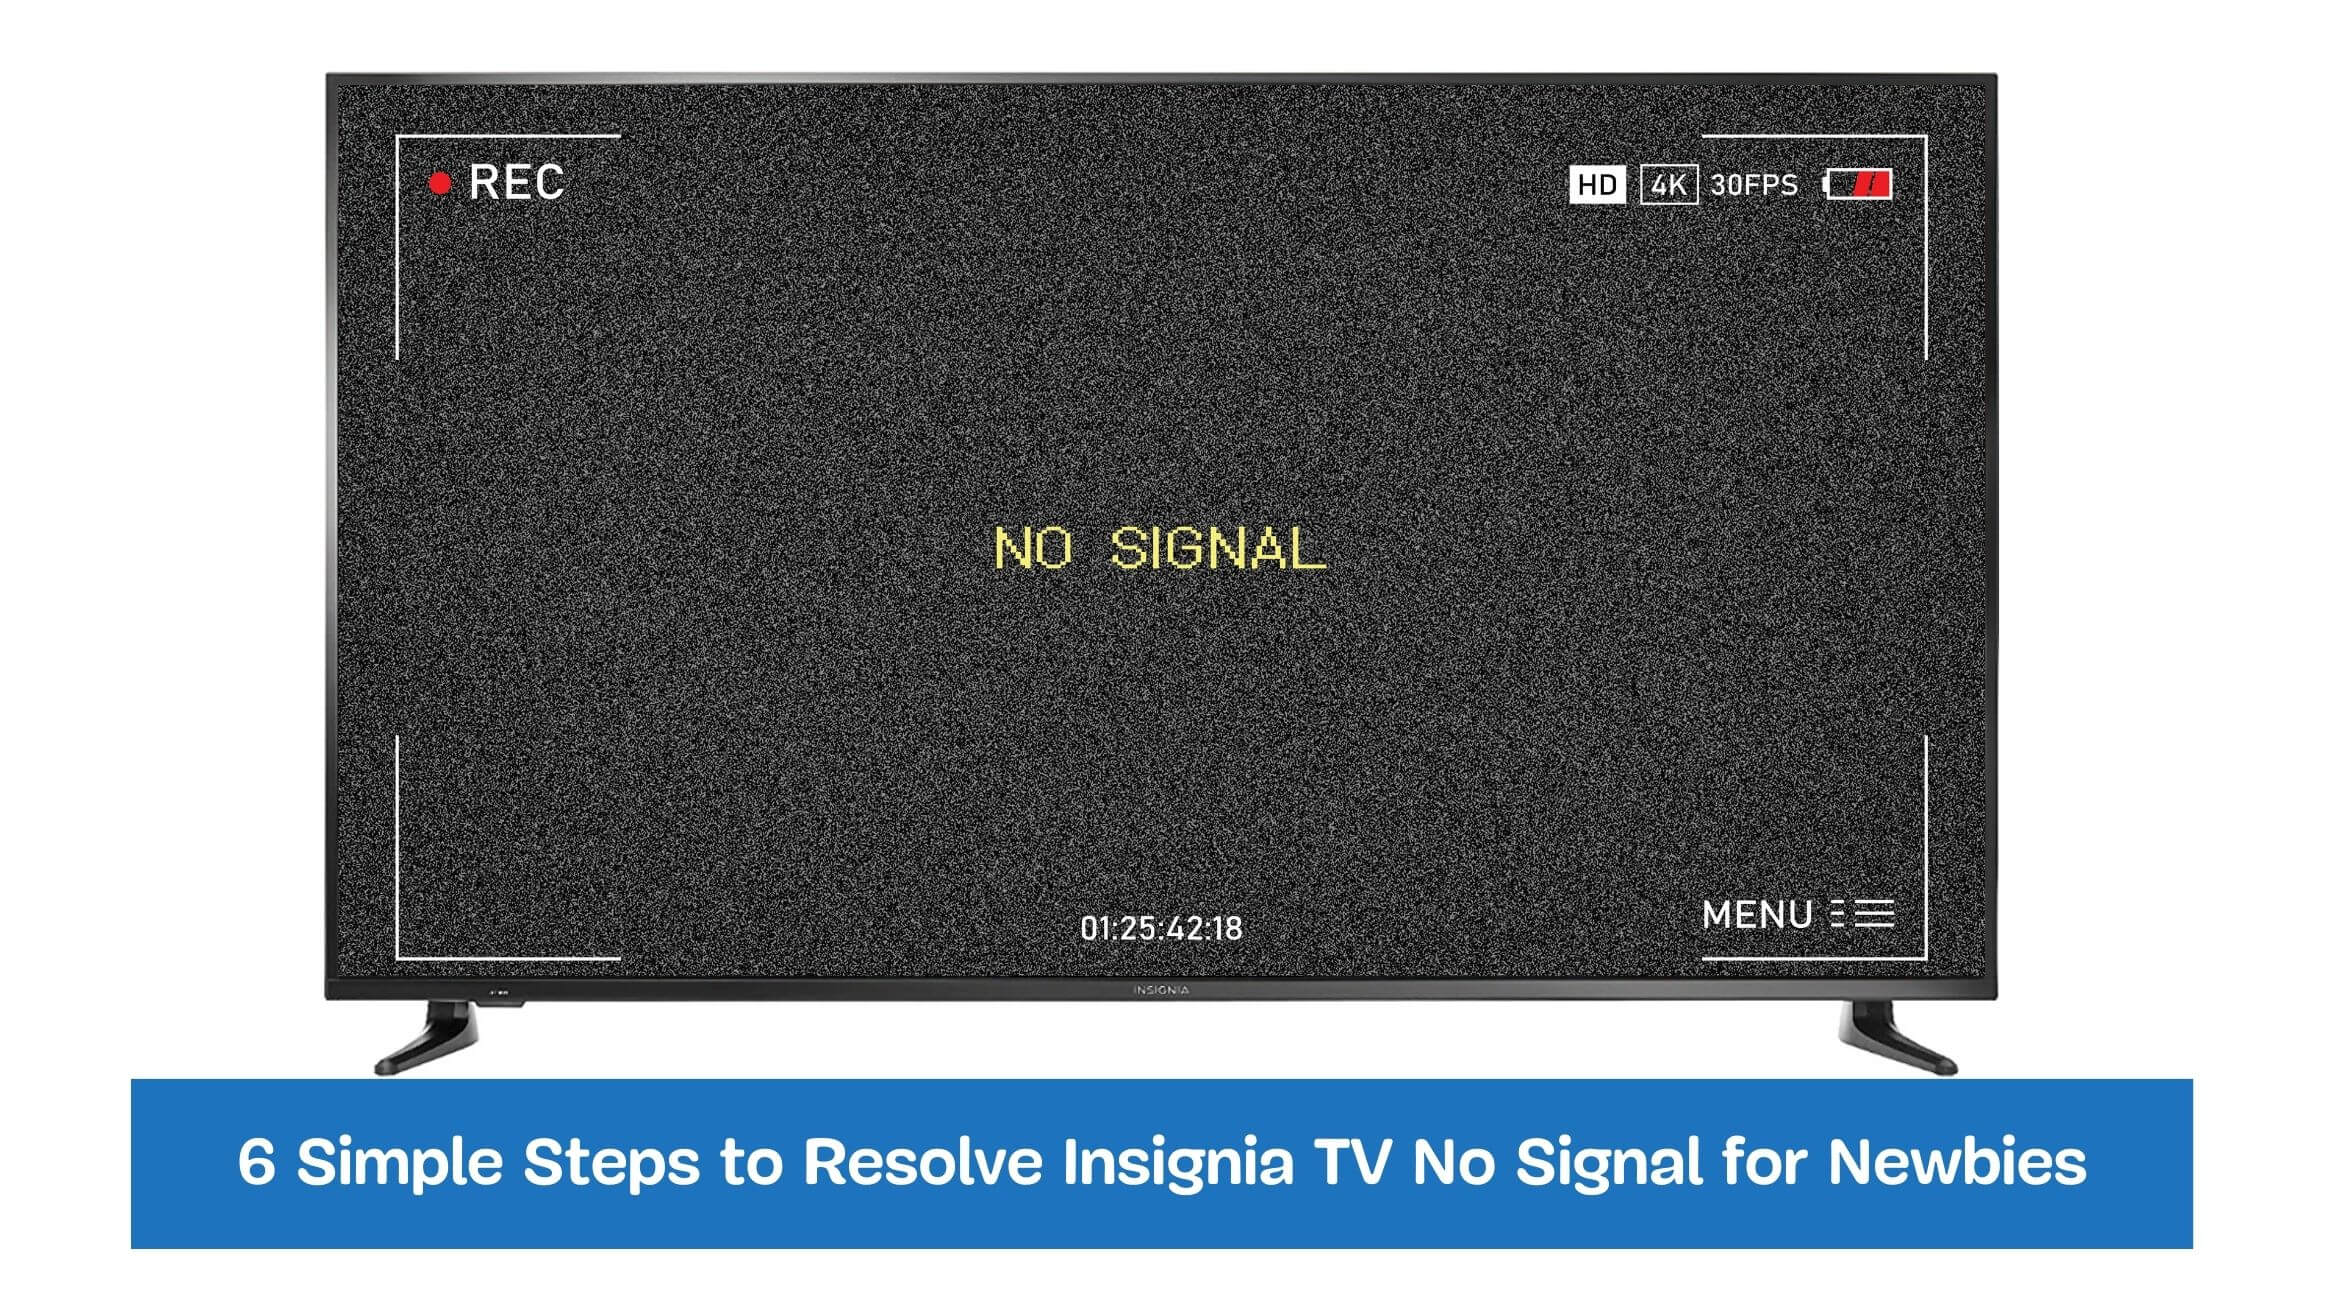 6 Simple Steps to Resolve Insignia TV No Signal for Newbies